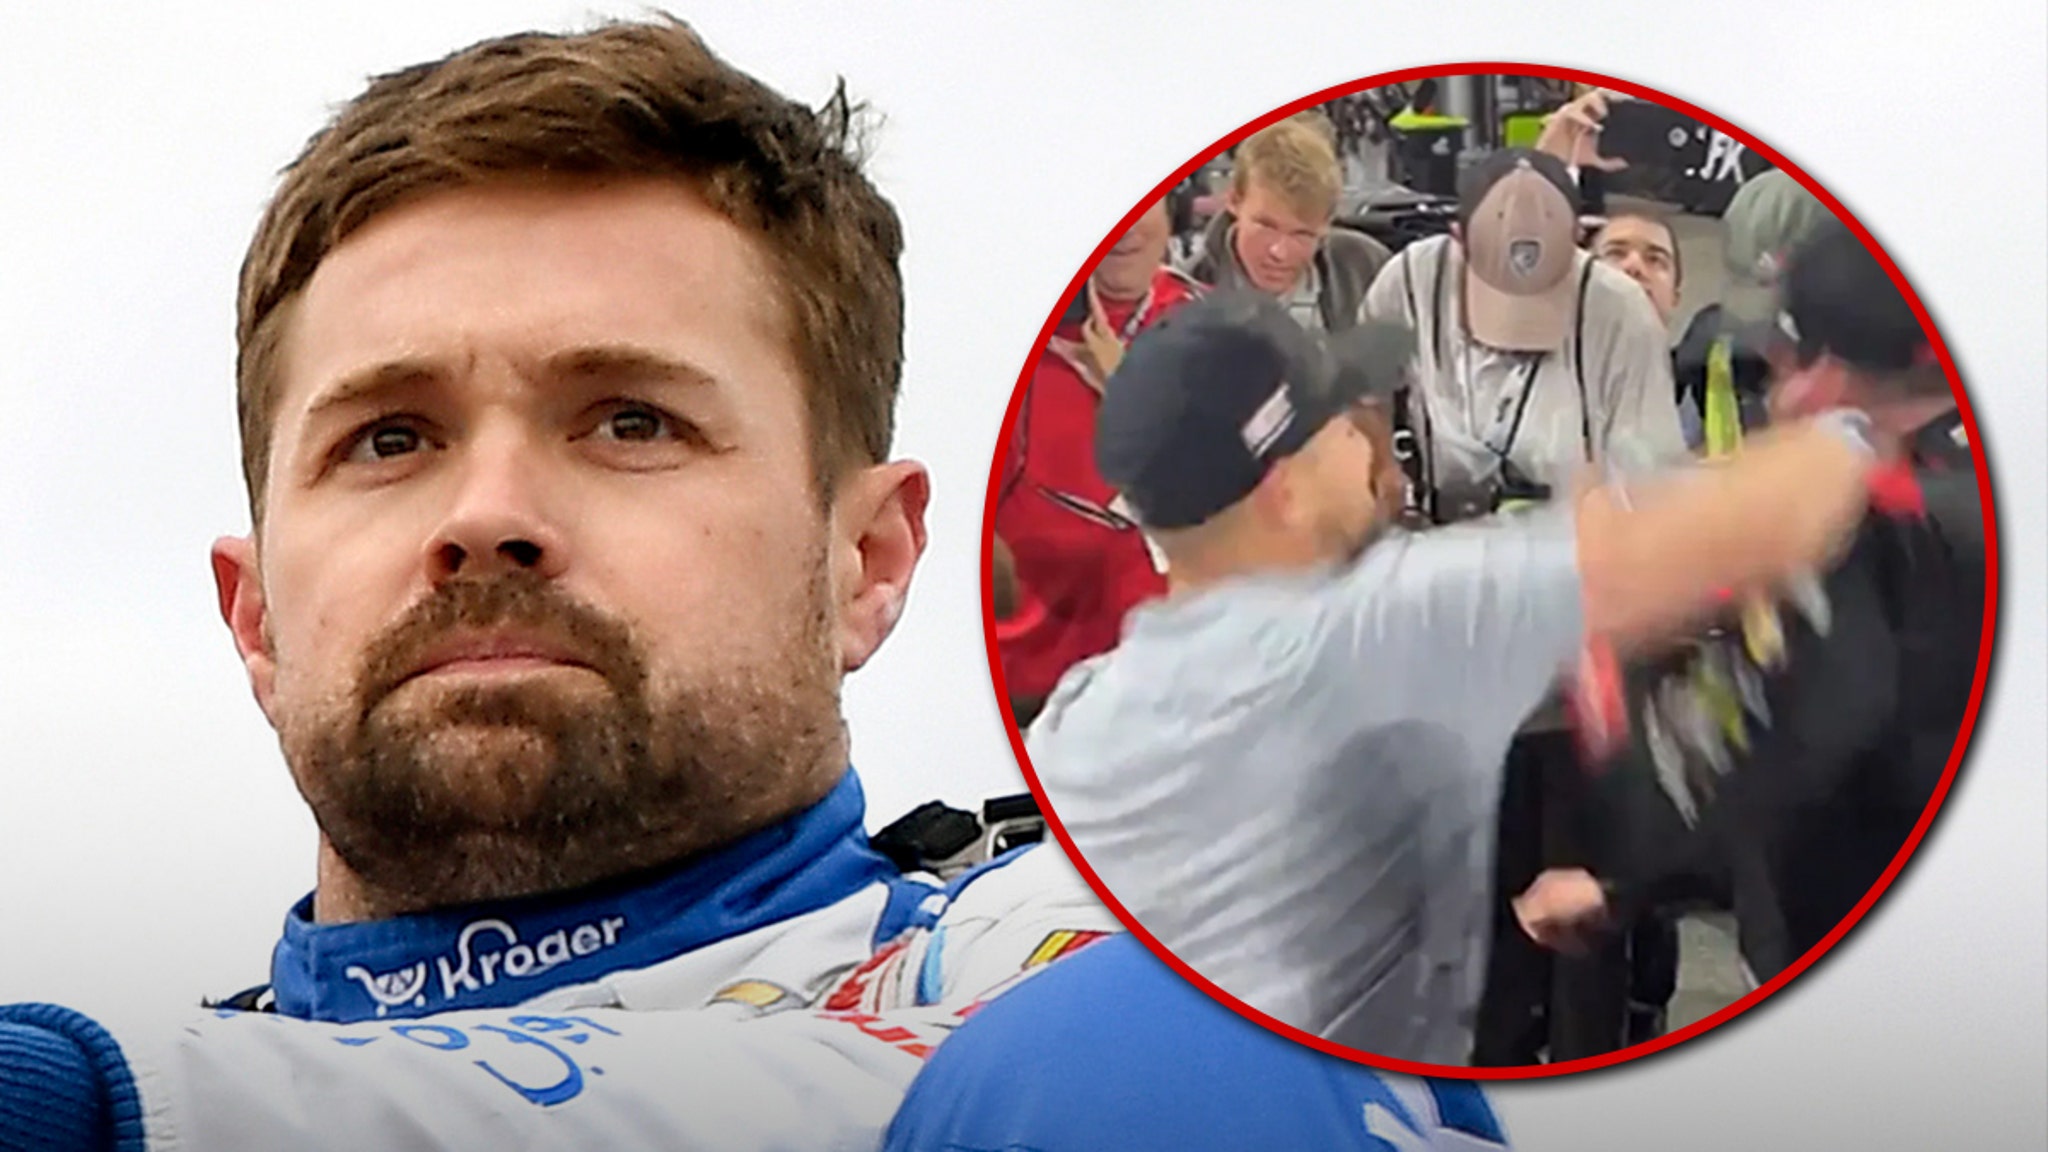 Ricky Stenhouse Jr. Fined $75k For Fighting Kyle Busch, Dad Suspended